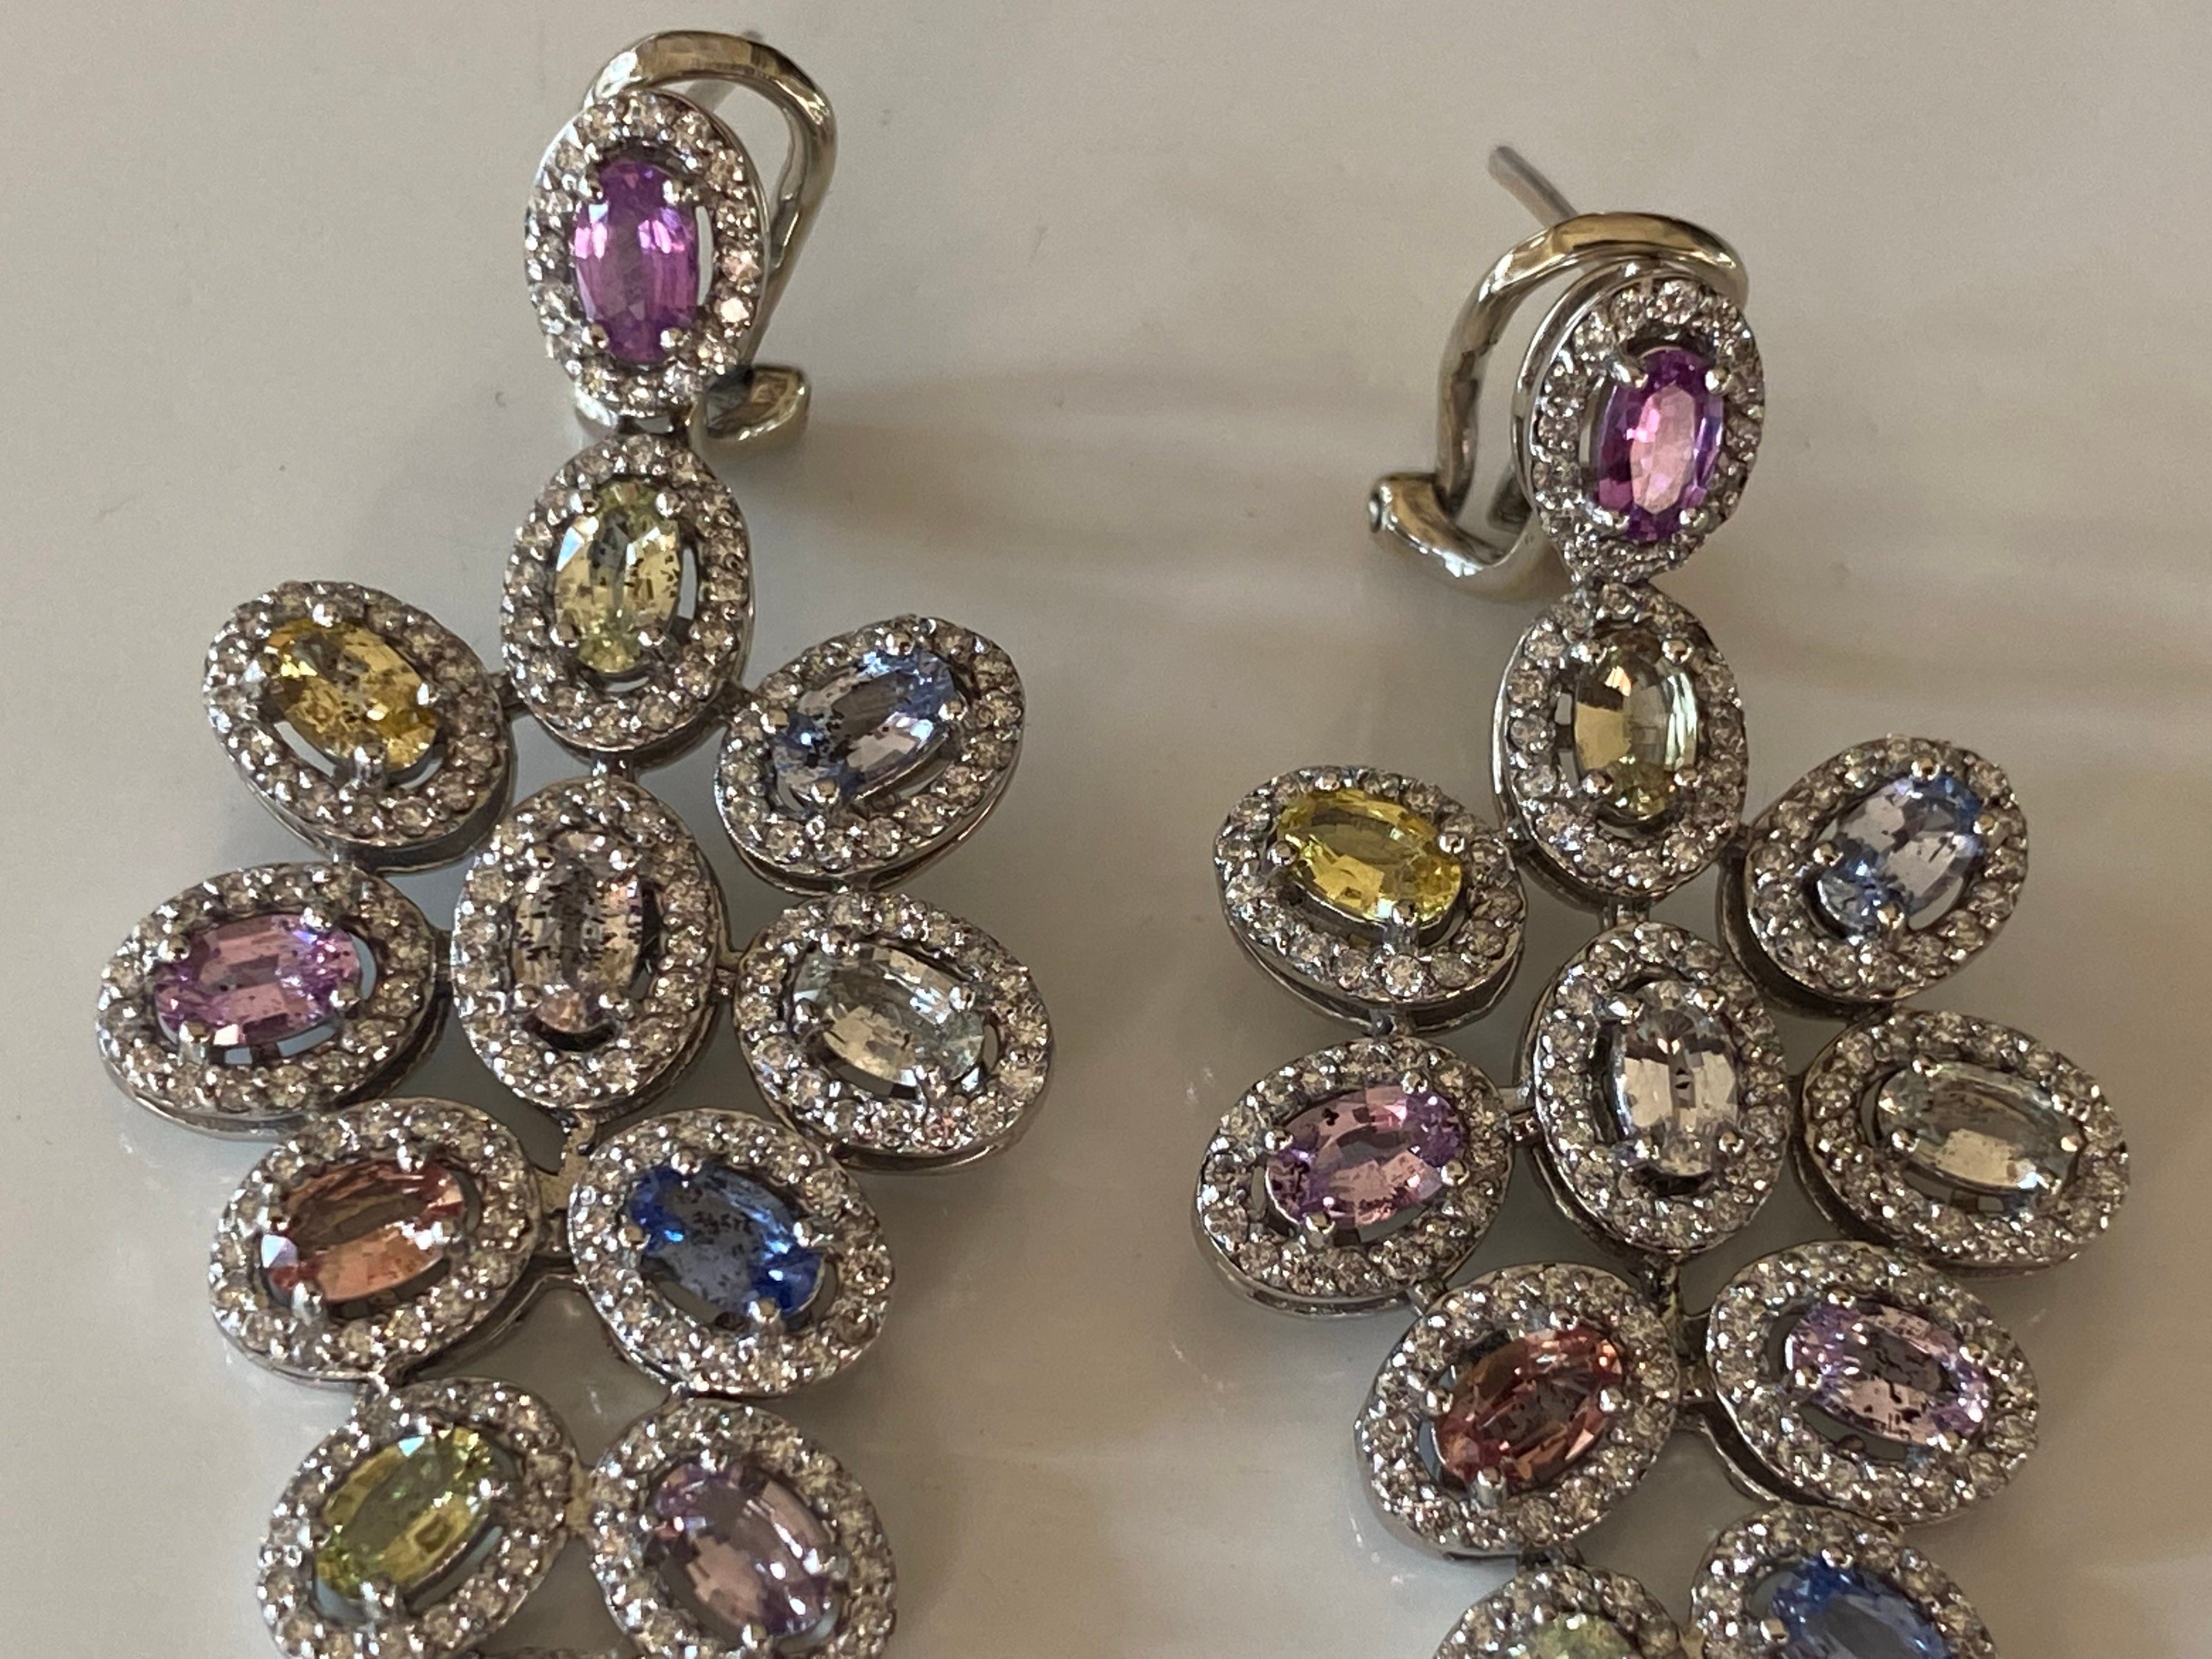 These exquisite drop down earrings set in 14kt white gold feature 32 multi-color unheated sapphires and 480 natural round diamonds, G-H color, SI clarity secured with omega clips. The diamonds total 2.50 carats and the sapphires total 8.00 carats.